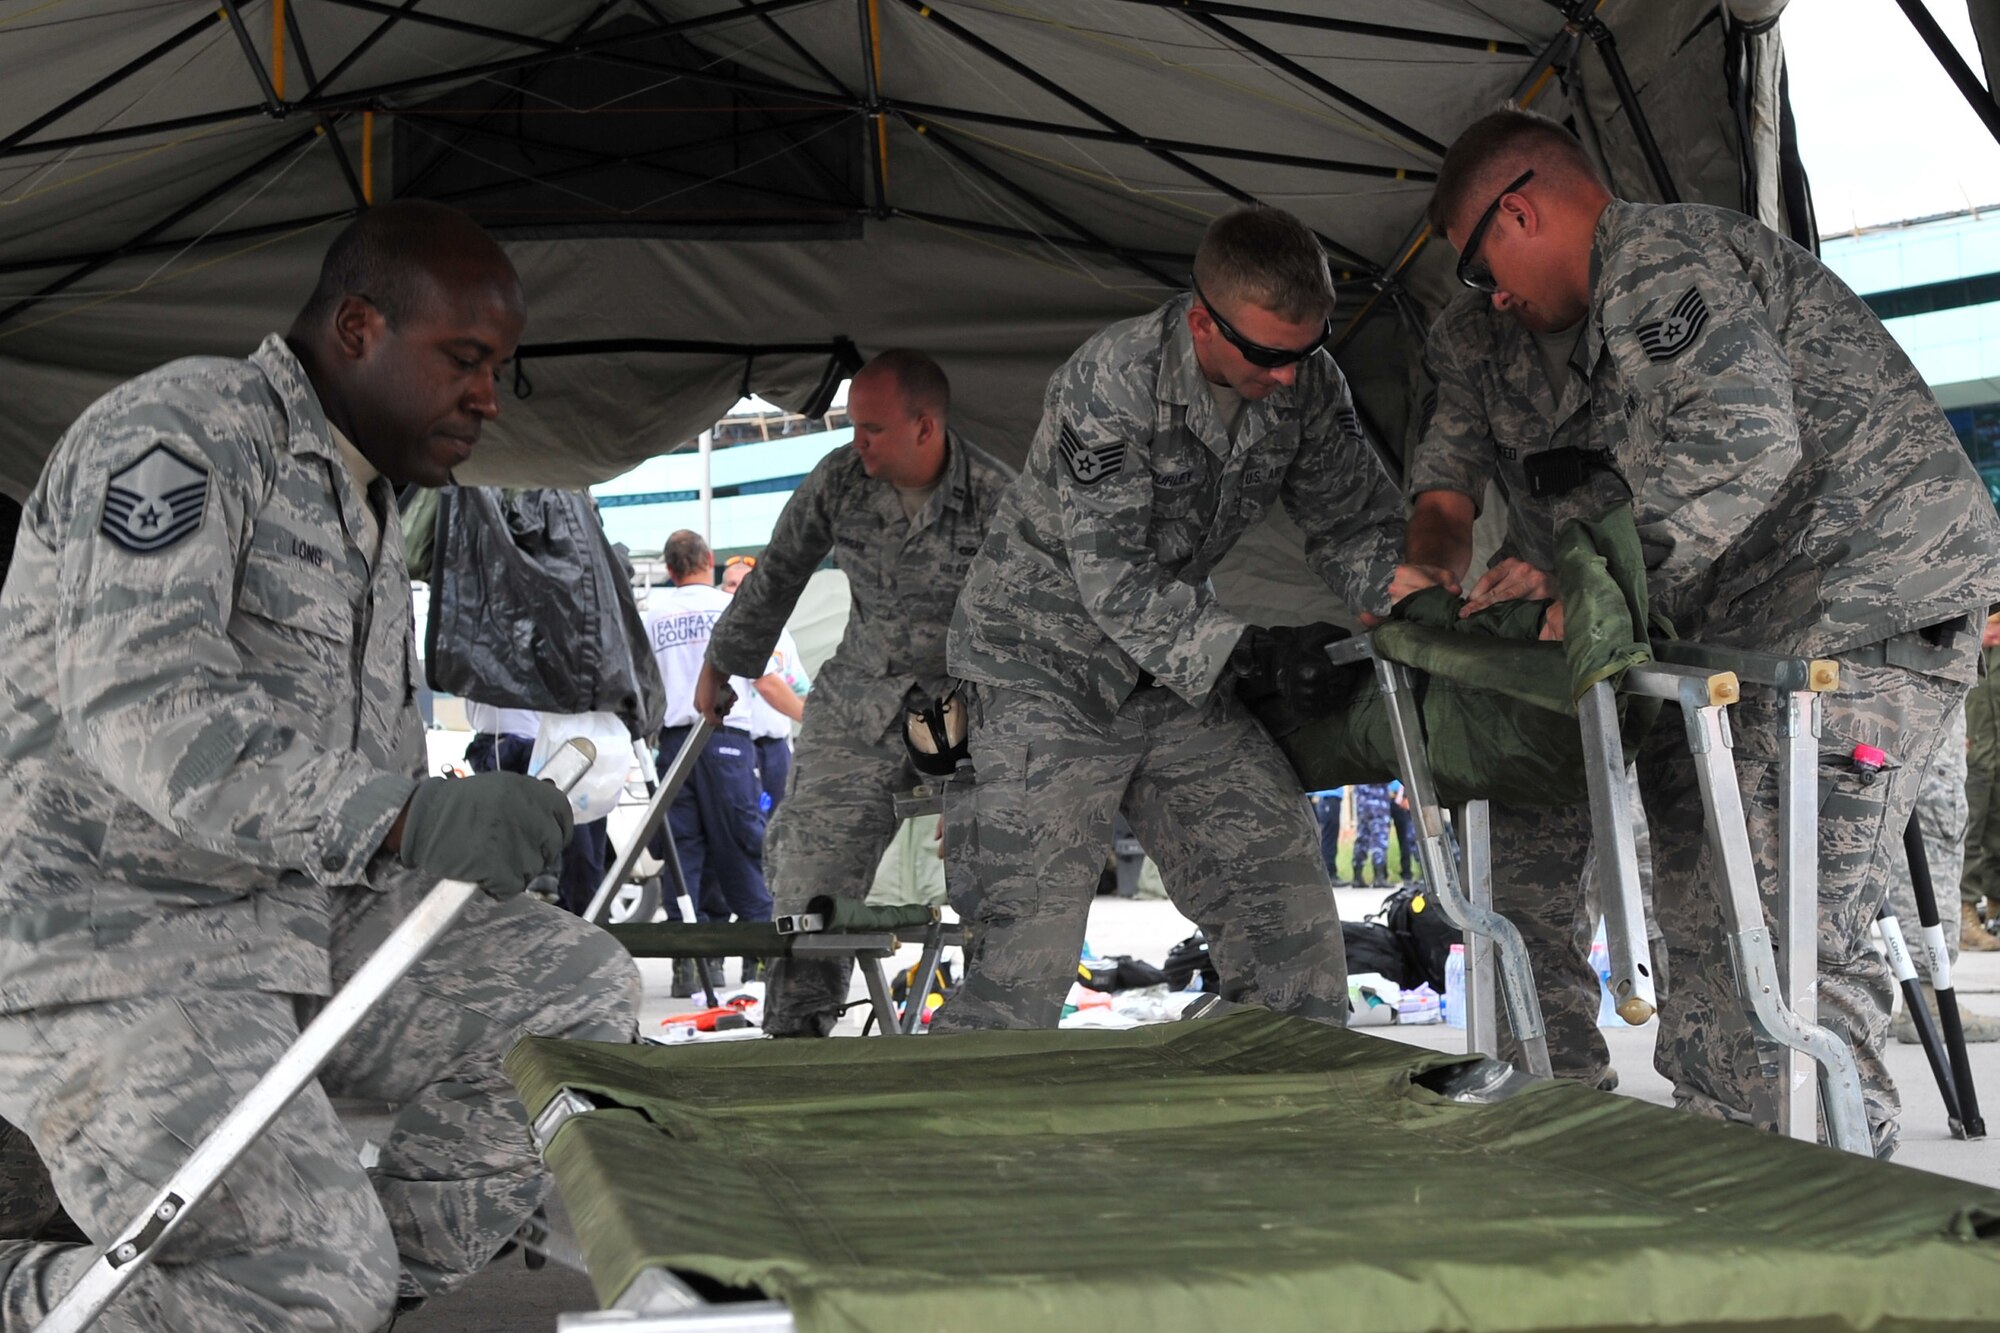 U.S. Airmen assigned to 36th Contingency Response Group set up a flightline aid station for medical professionals to take care of earthquake victims at the Tribhuvan International Airport in Kathmandu, Nepal, May 12, 2015. Joint Task Force-505 members worked with the Nepalese army to triage, treat and transport patients after a 7.3 magnitude earthquake struck the same day following a 7.8 magnitude earthquake that devastated the nation April 25, 2015. (U.S. Air Force photo by Staff Sgt. Melissa B. White/Released)